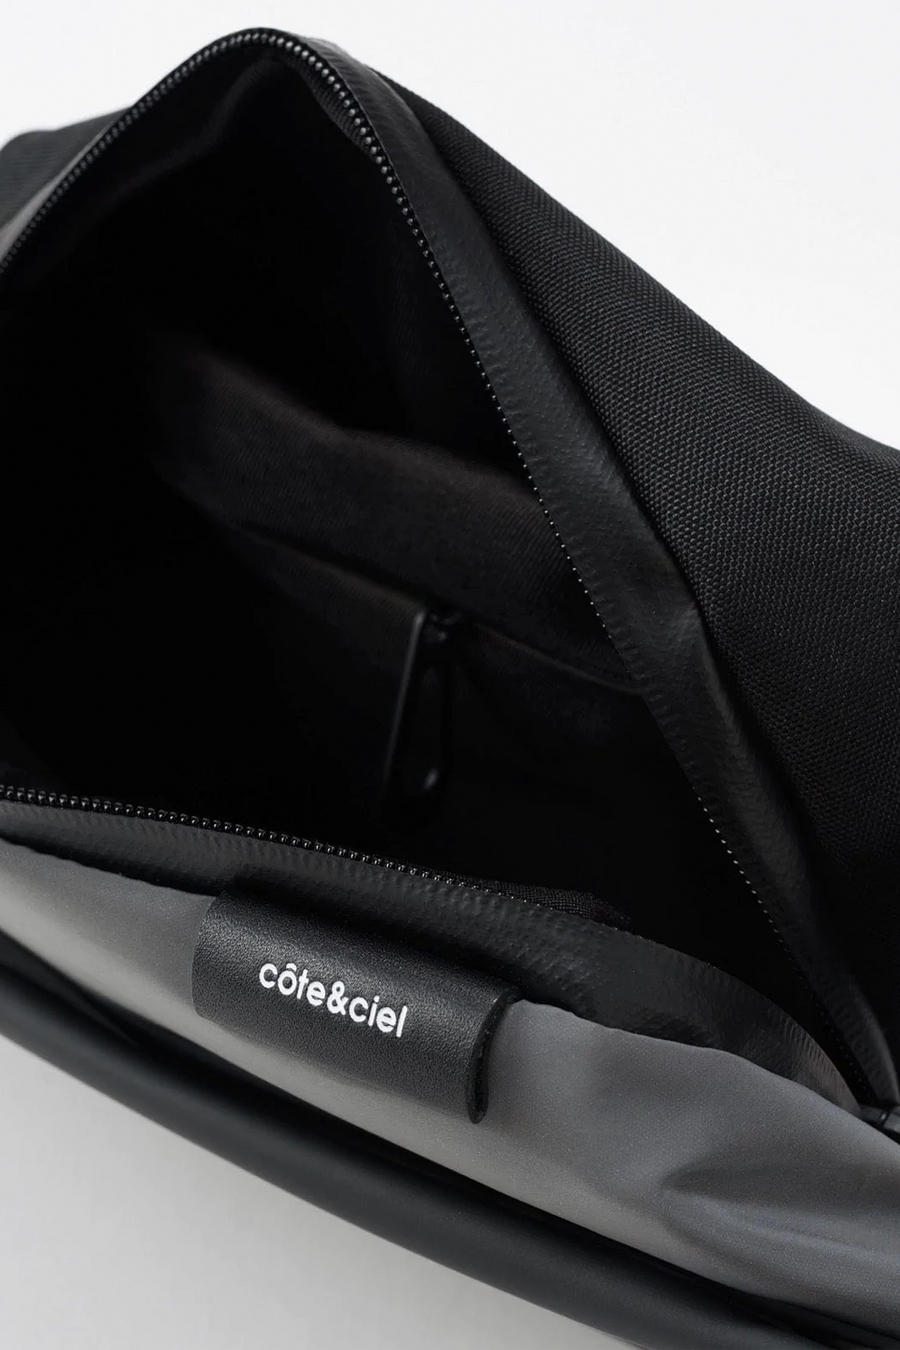 Buy the Cote & Ciel Isarau Cross Body Small Reflective in Black at Intro. Spend £50 for free UK delivery. Official stockists. We ship worldwide.